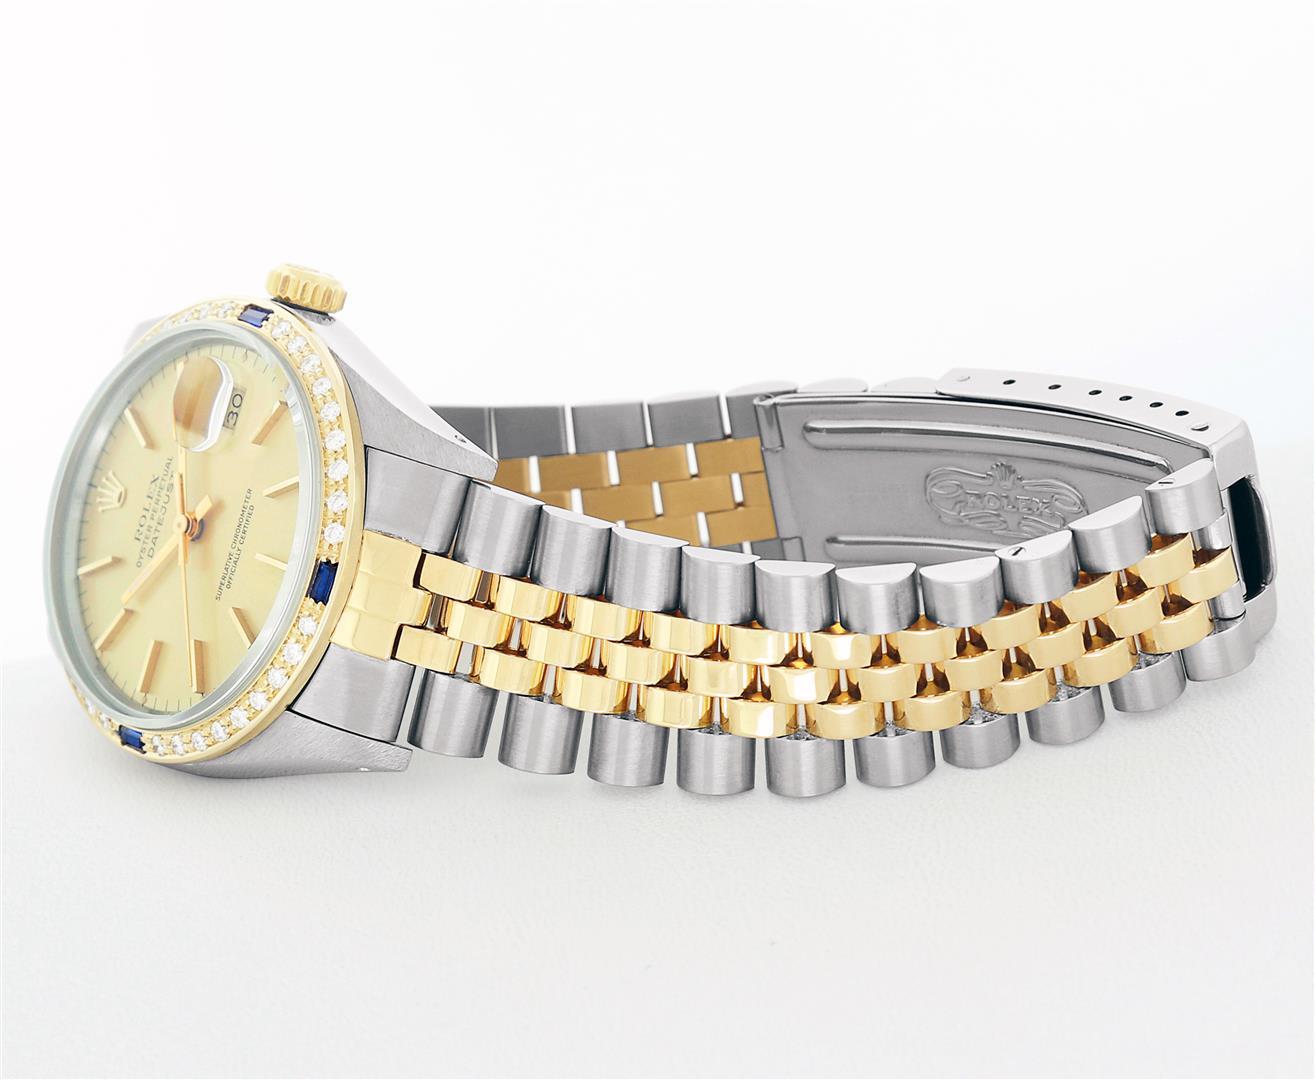 Rolex Mens Champagne Index Dial 18K Yellow Gold Sapphire And Diamond Bezel Datej